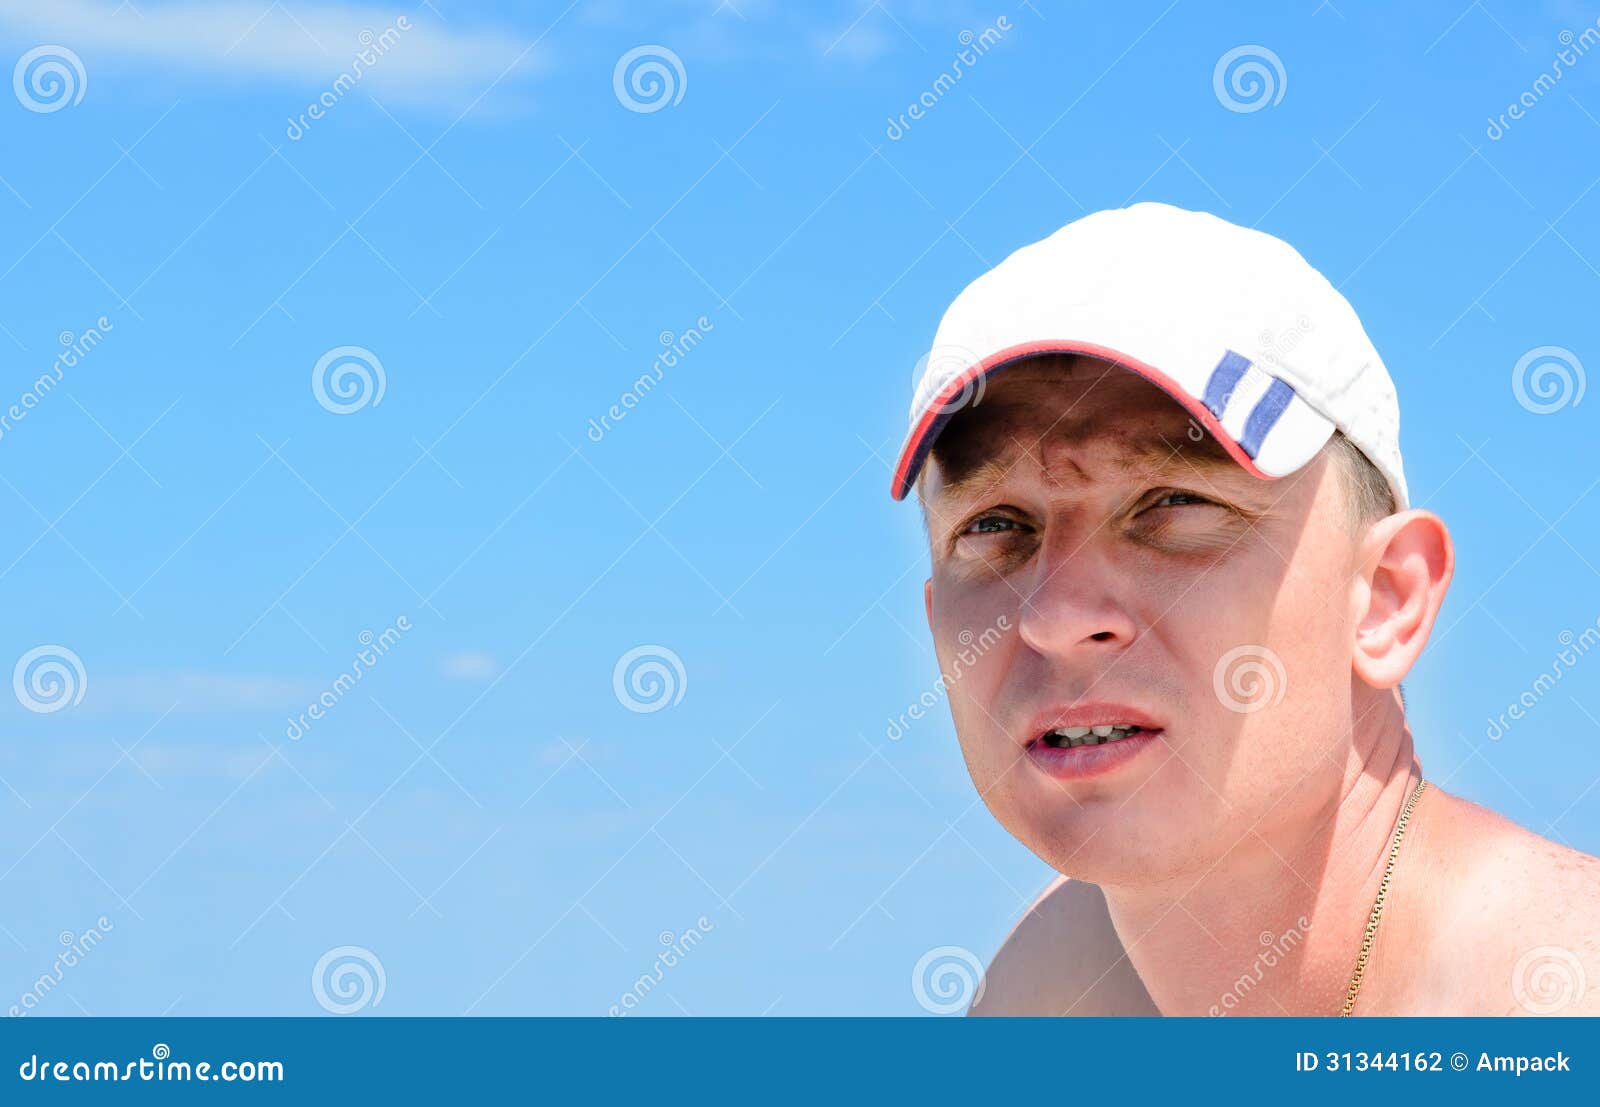 Pensive young man. Portrait of a young pensive man with cap